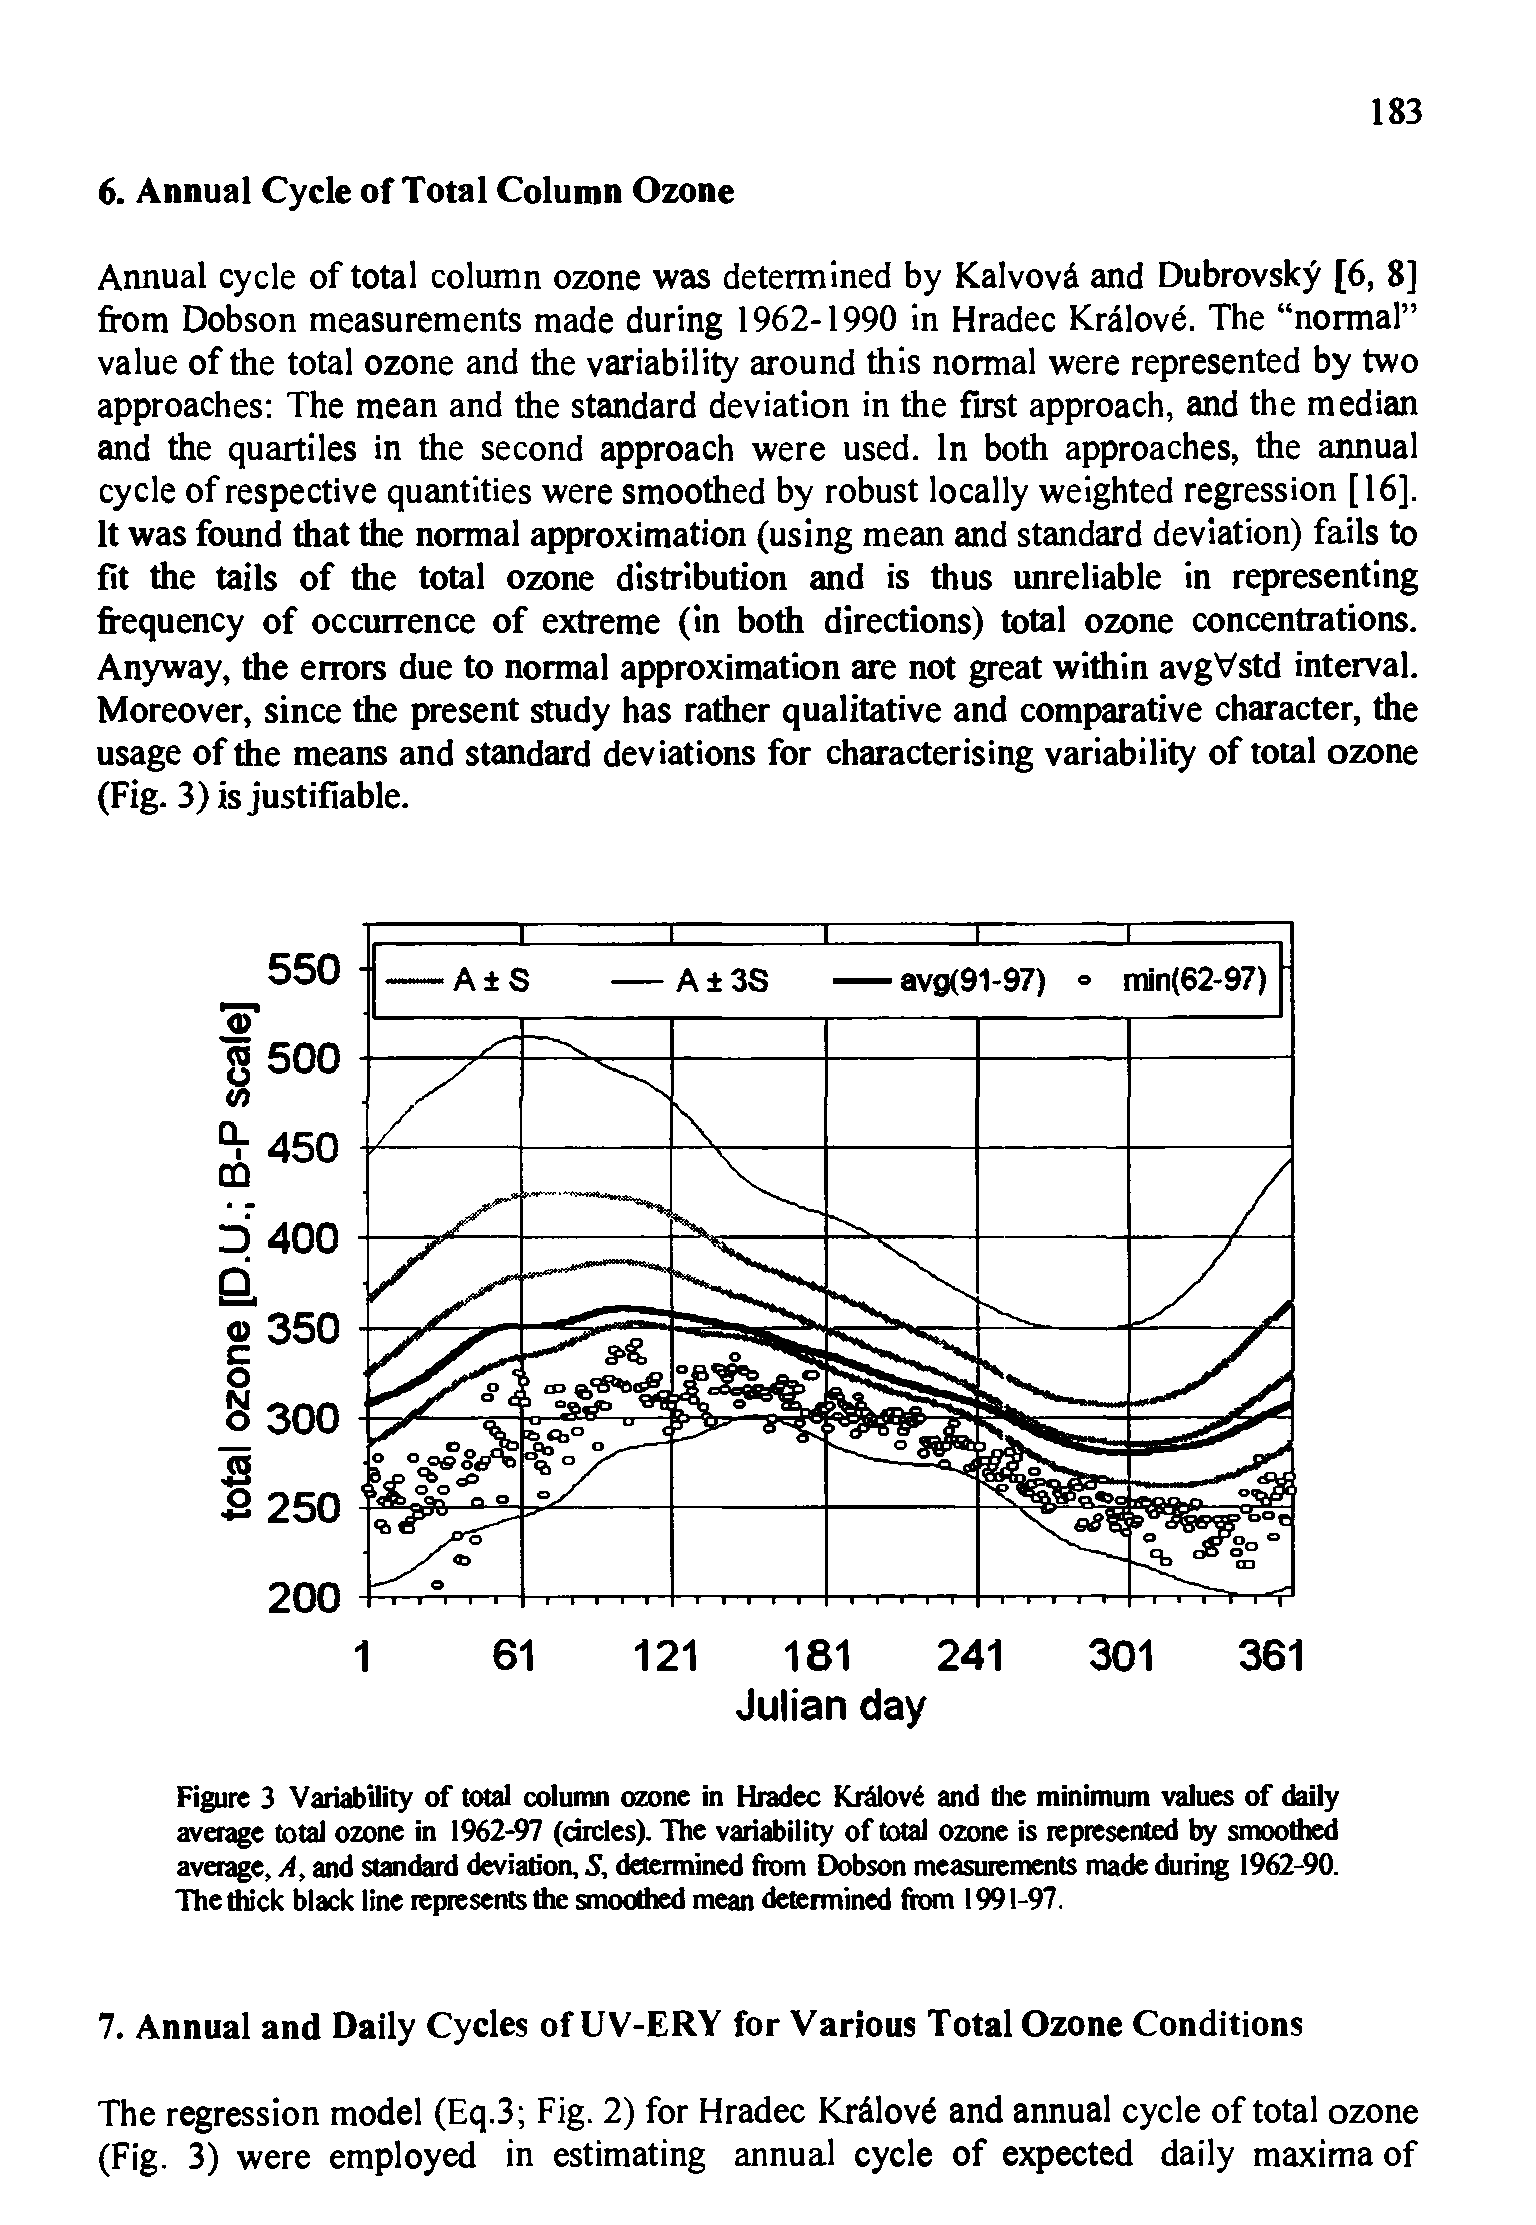 Figure 3 Variability of total column ozone in Hradec Krfilovd and die minimum values of daily average total ozone in 1962-97 (circles). The variability of total ozone is represented by smoothed average, A, and standard deviation, S, determined from Dobson measurements made during 1962-90. The thick black line represents the smoothed mean determined from 1991-97.